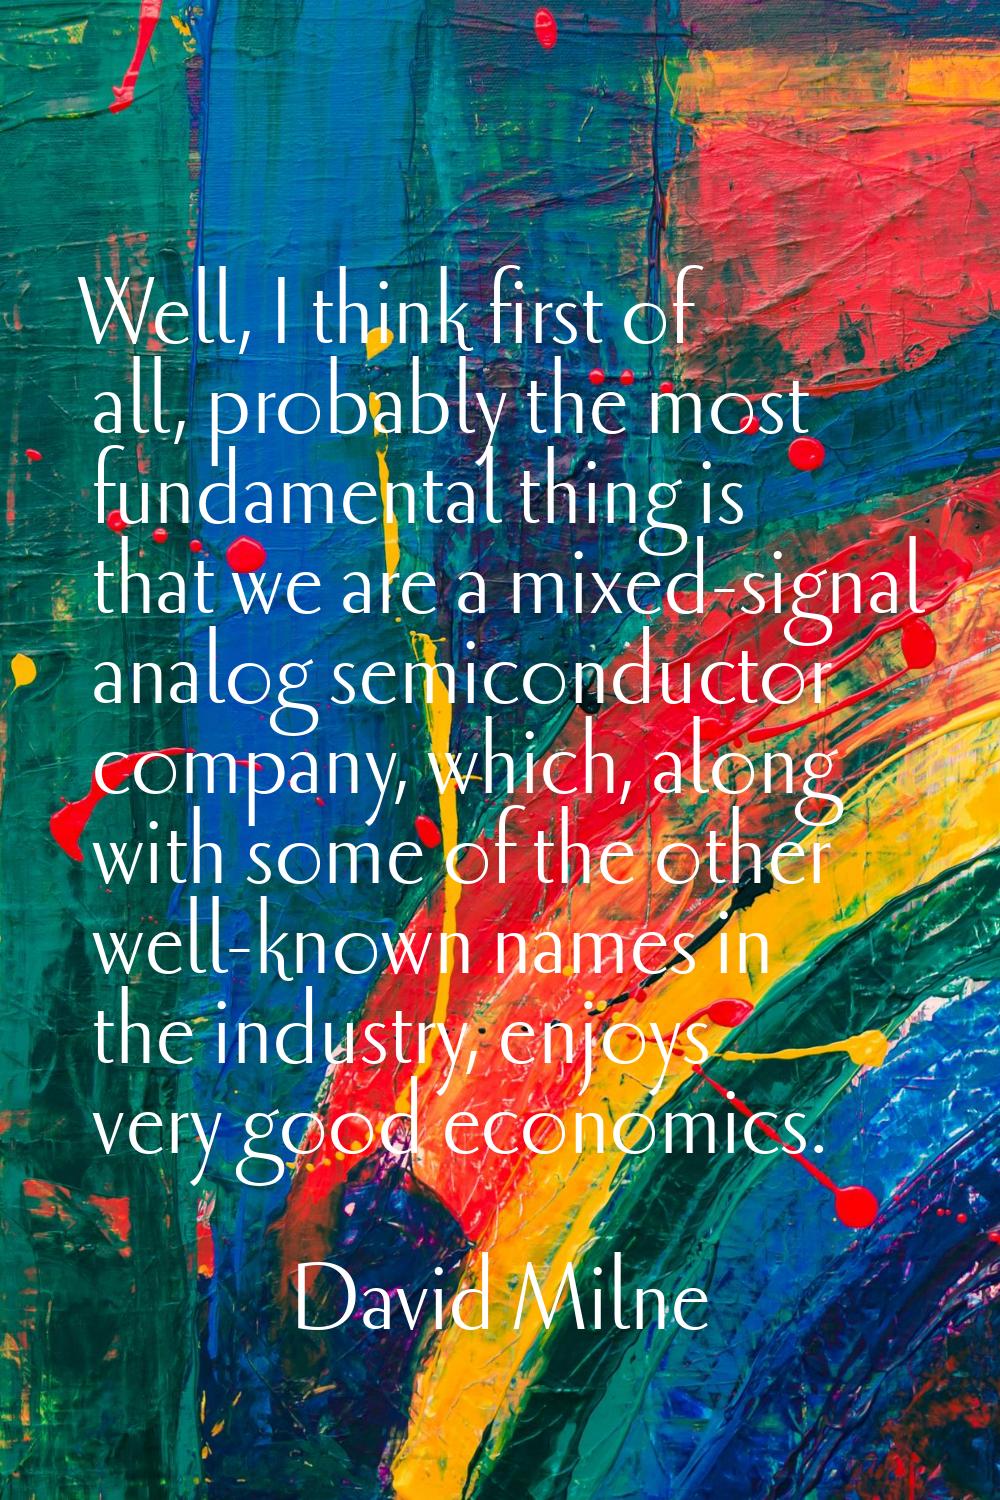 Well, I think first of all, probably the most fundamental thing is that we are a mixed-signal analo